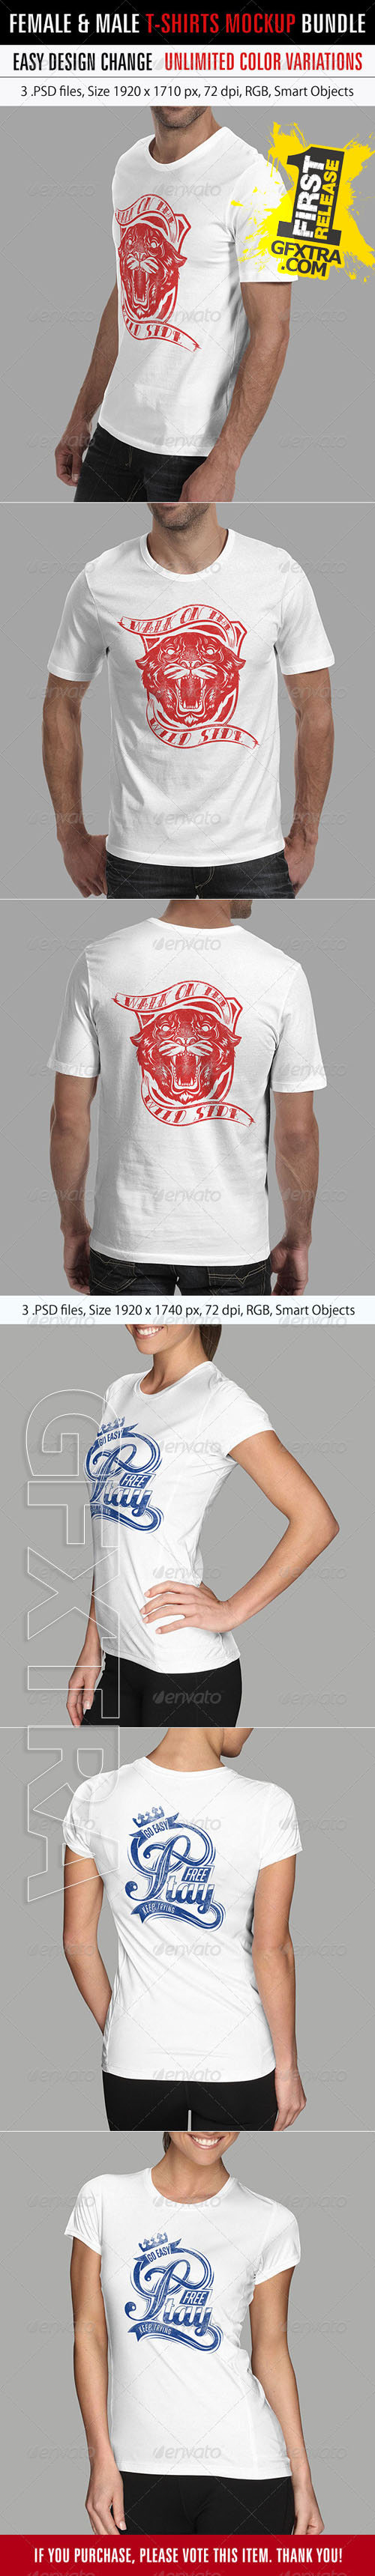 GraphicRiver - Female and Male T-Shirt Bundle 